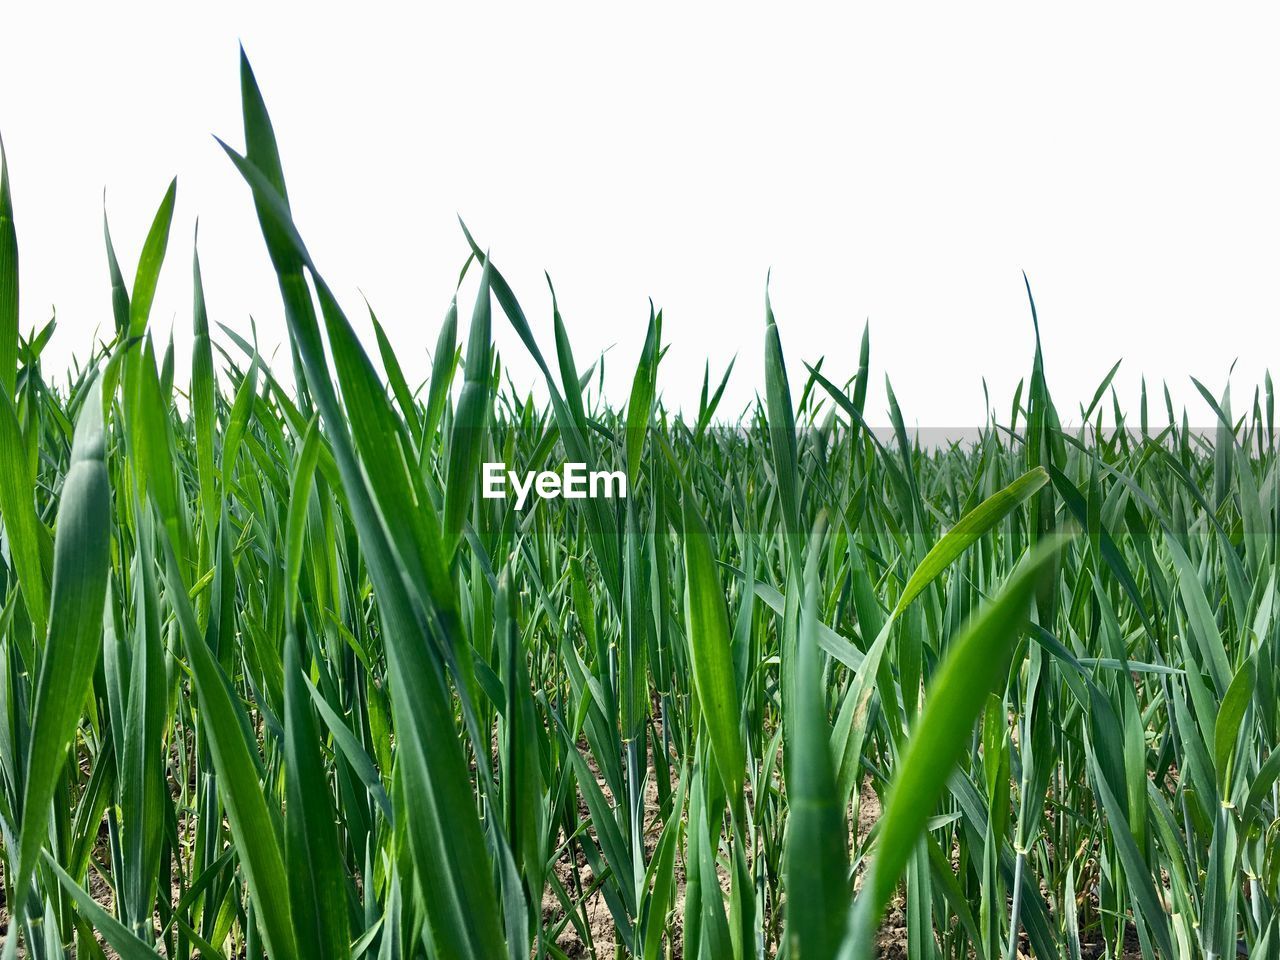 CLOSE-UP OF CROPS GROWING IN FIELD AGAINST CLEAR SKY